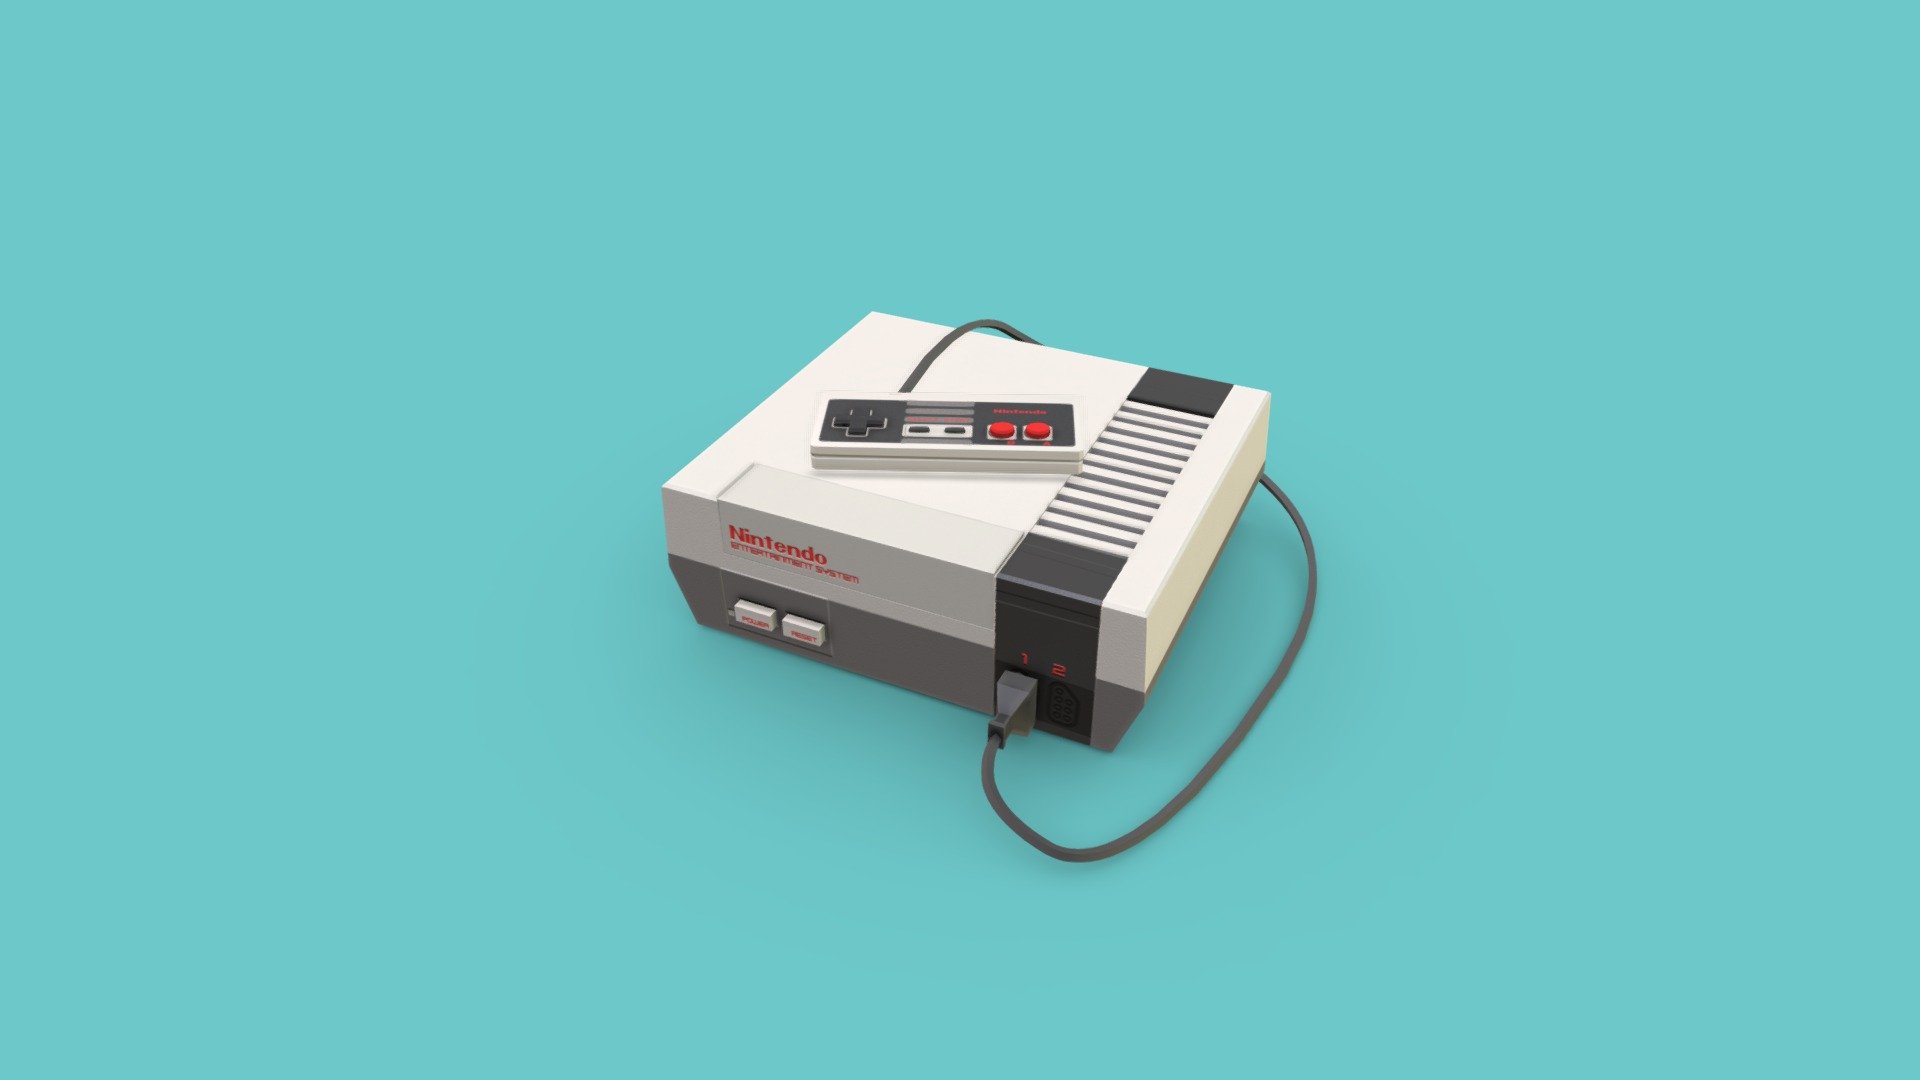 Made for SFM. http://steamcommunity.com/profiles/76561198039783201/ - Nintendo Entertainment System - 3D model by Unconid 3d model